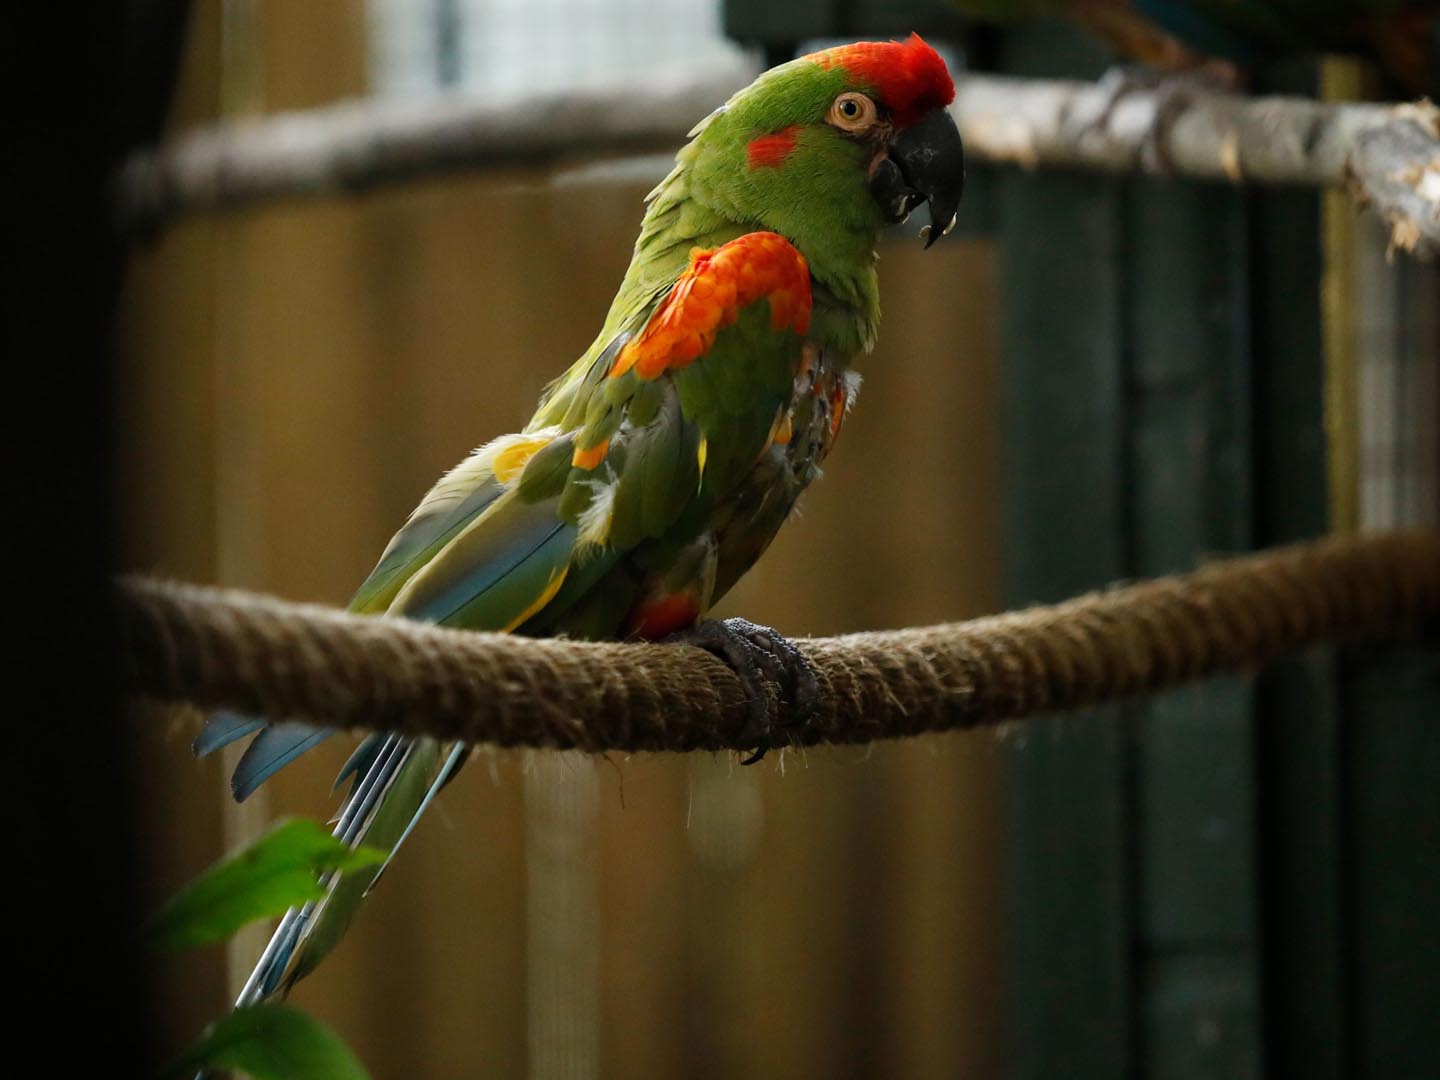 Red fronted macaws sitting on rope Image: Sian Adison 2019